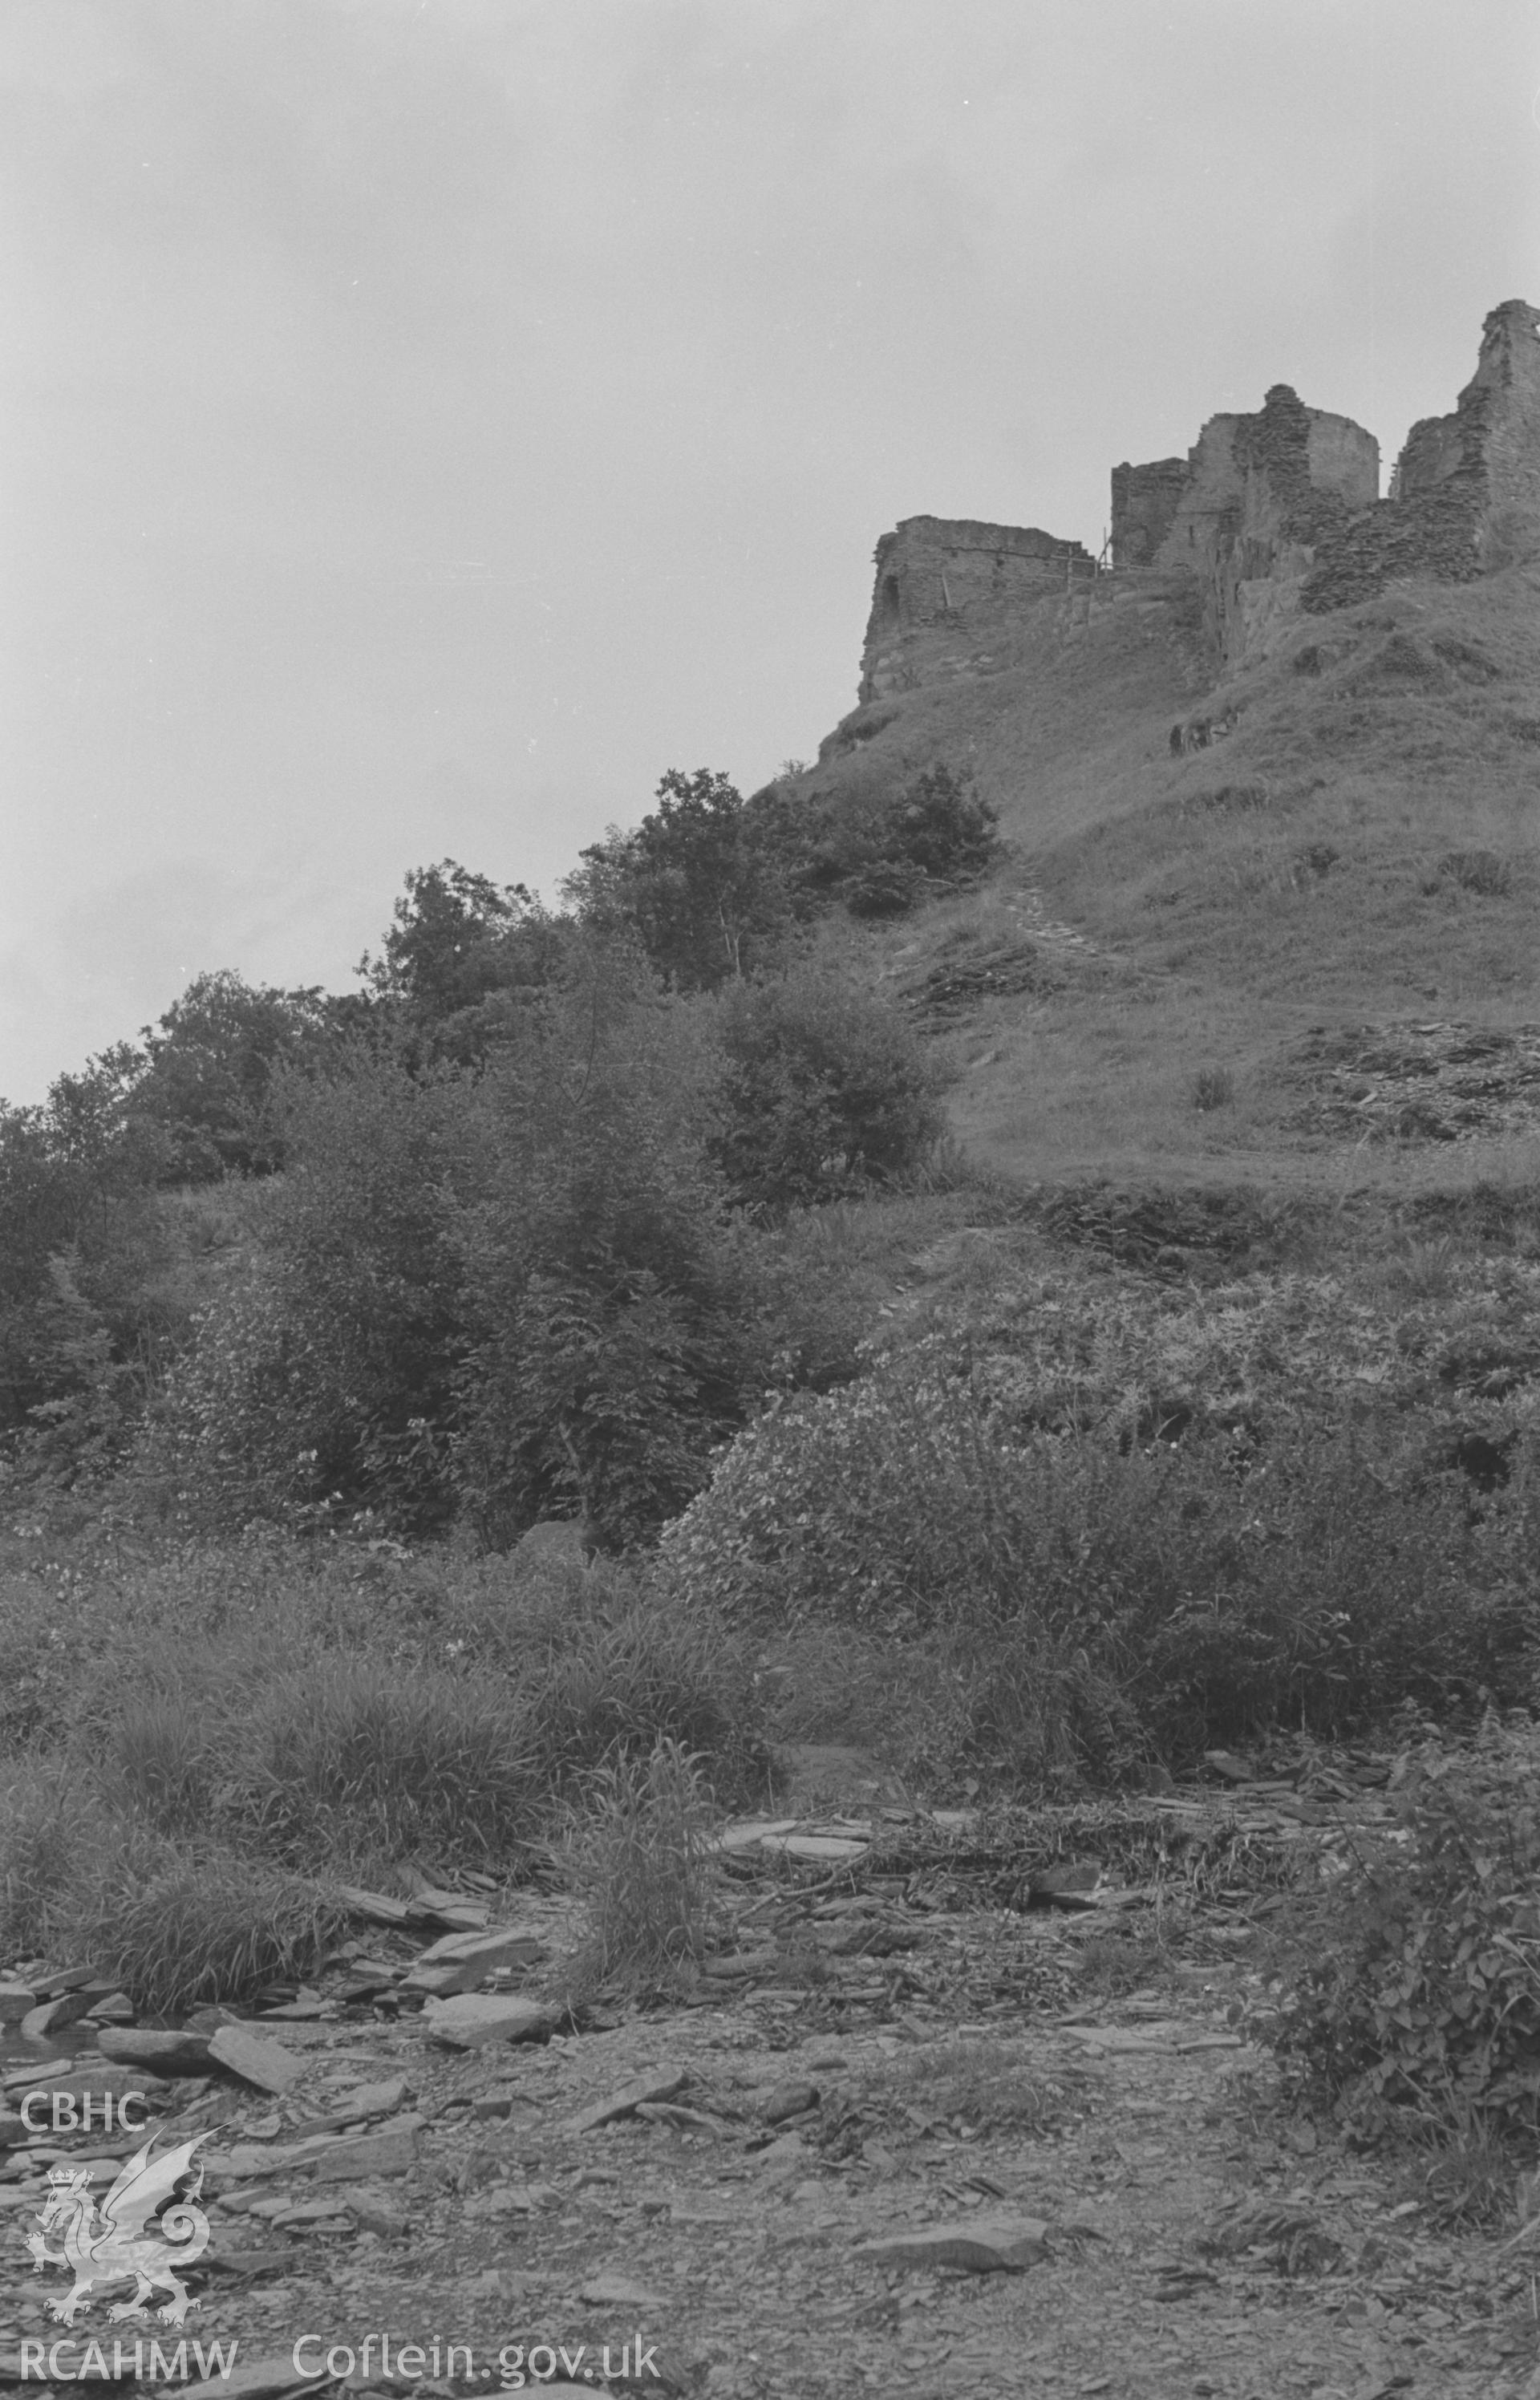 Digital copy of a black and white negative showing Coedmore woods, the Teifi, and Cilgerran castle. Photographed in September 1963 by Arthur O. Chater from Grid Reference SN 1947 4324, looking south south east - east. Panorama, photo 2 of 4.